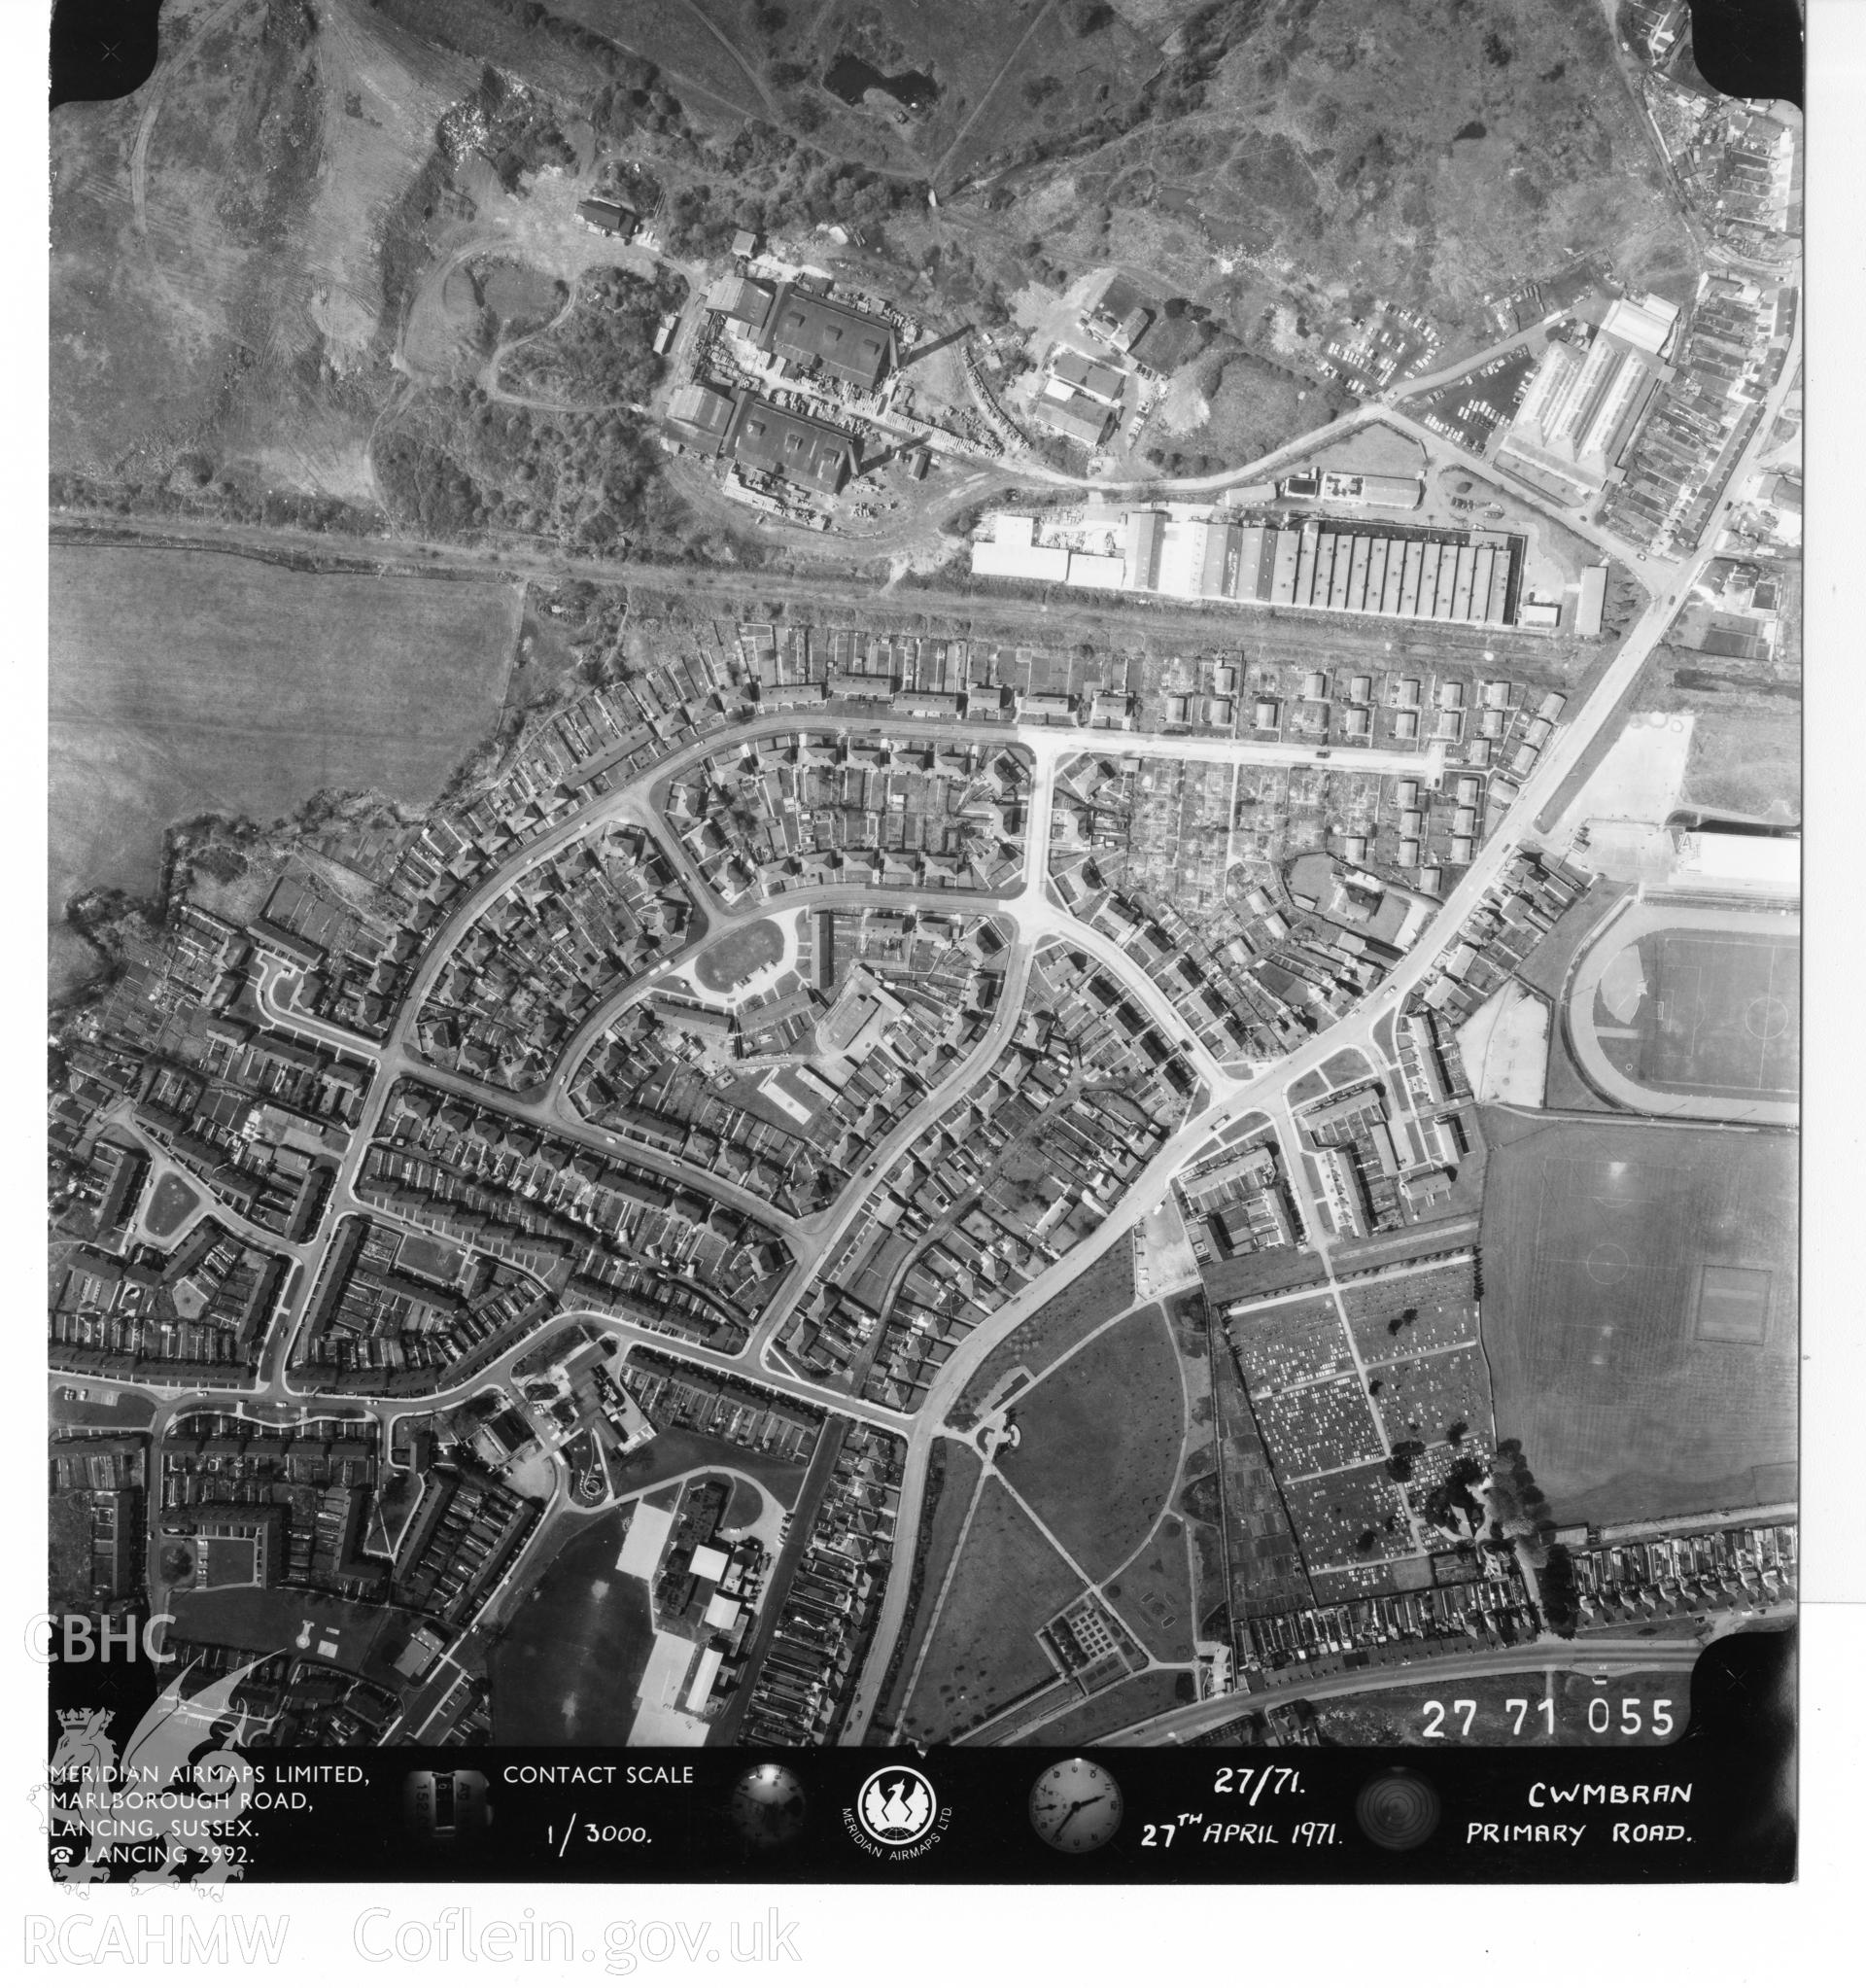 Aerial photograph of Primary Road, Cwmbran, taken on 27th April 1971. Included as part of Archaeology Wales' desk based assessment of former Llantarnam Community Primary School, Croeswen, Oakfield, Cwmbran, conducted in 2017.